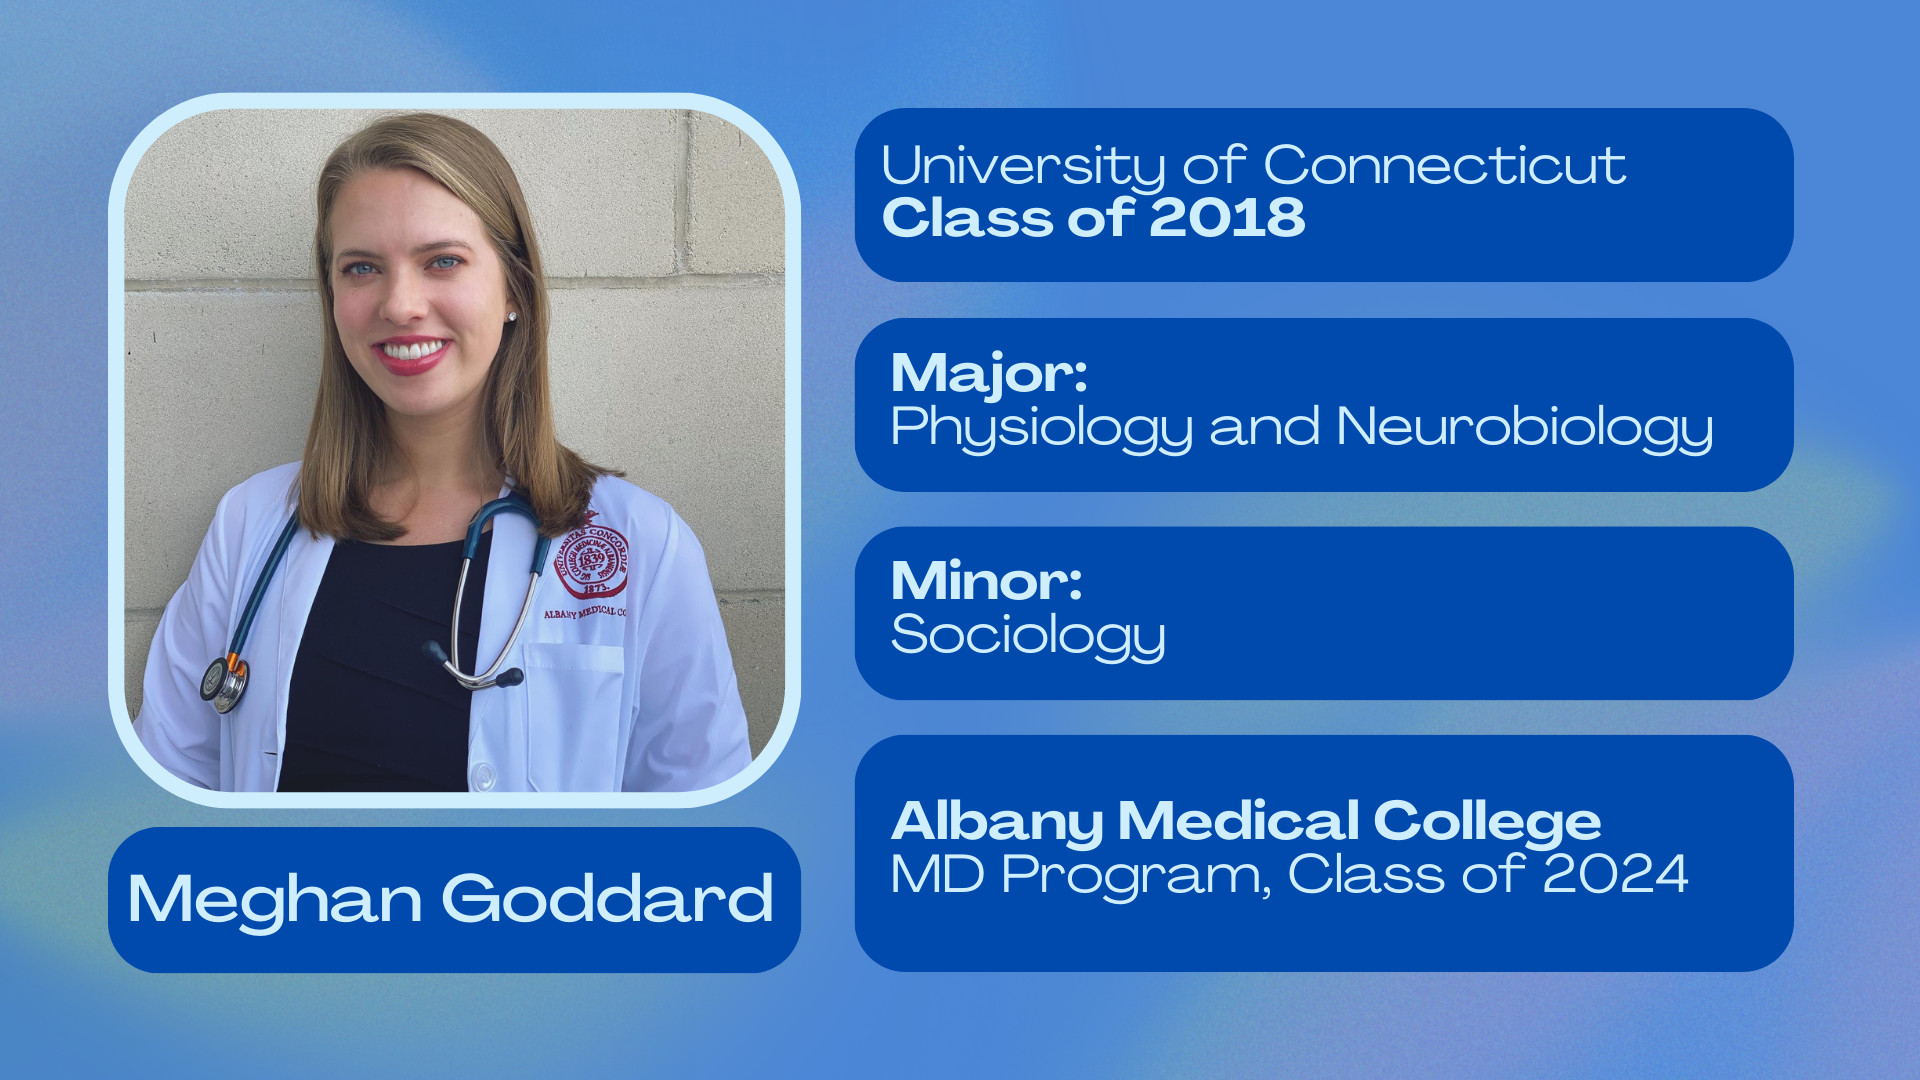 Meghan Goddard; University of Connecticut class of 2018; Major: Physiology and Neurobiology; Minor: Sociology; Albany Medical College class of 2024